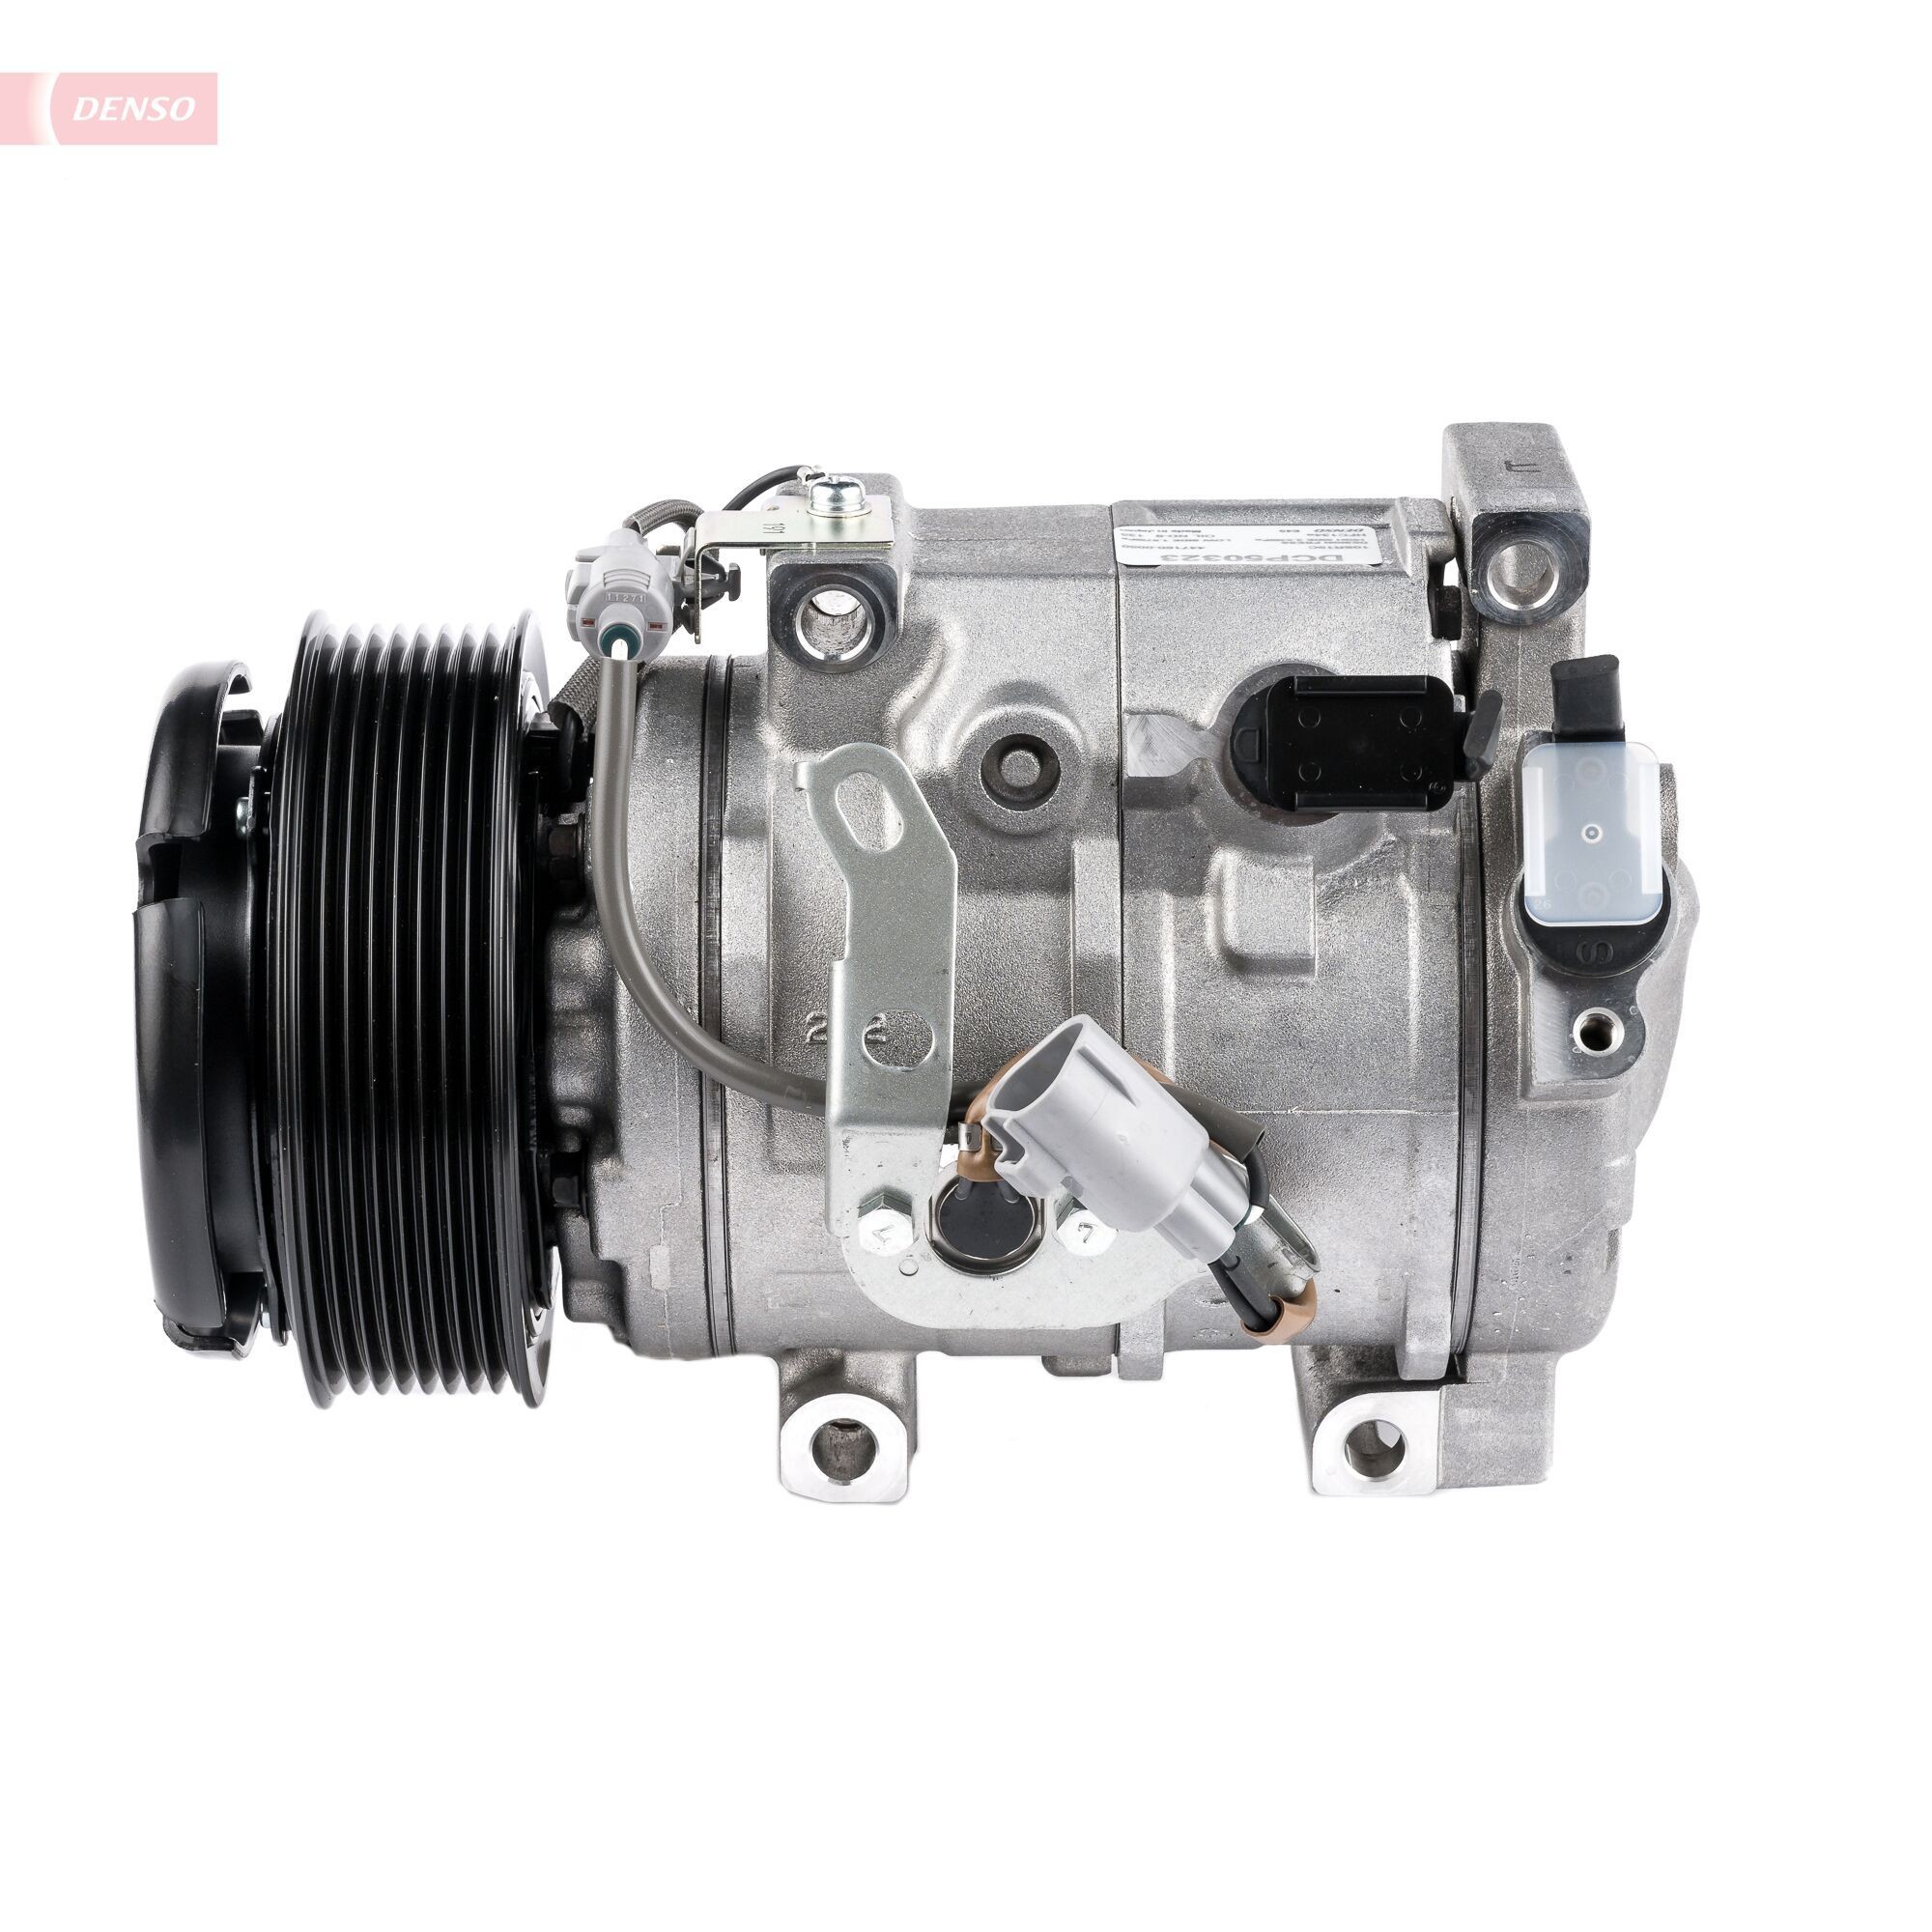 DENSO DCP50323 Air conditioner compressor 10SR19C, 12V, PAG 46, R 134a, with magnetic clutch